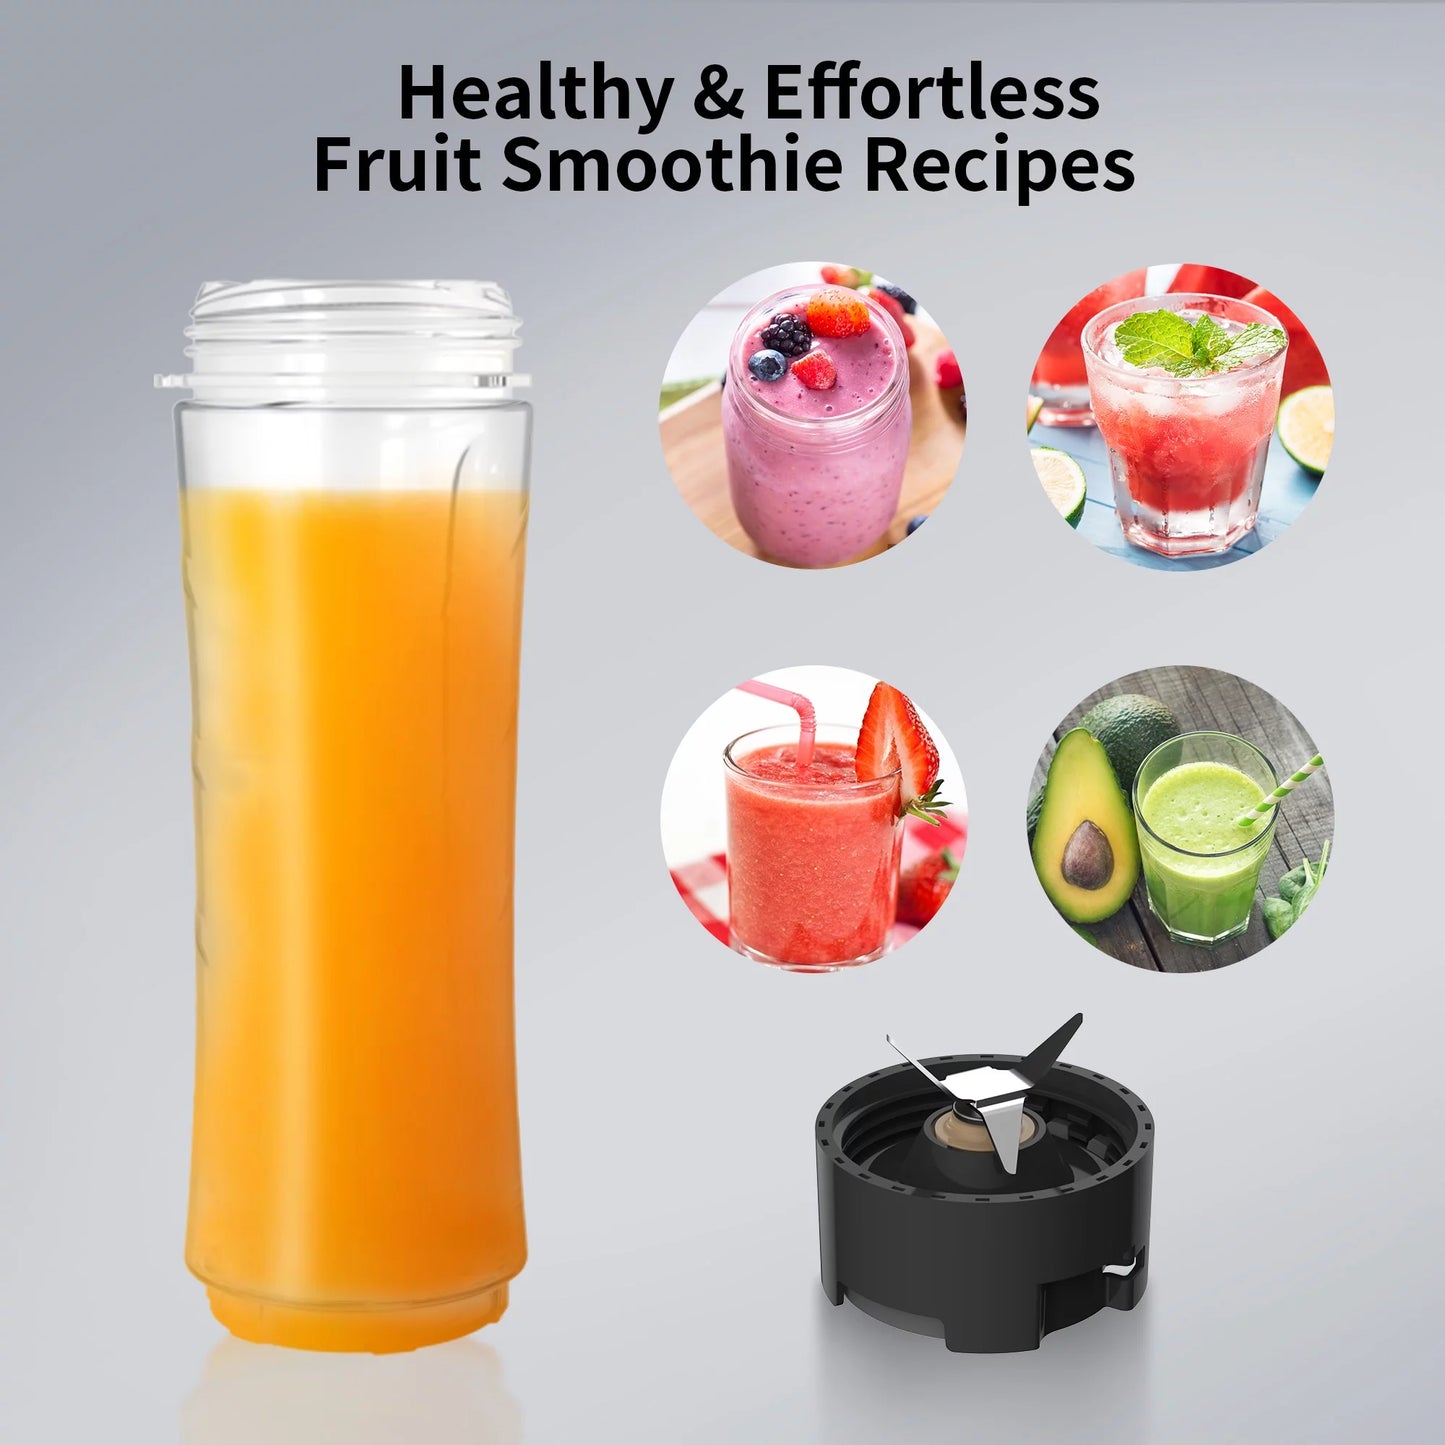 "Powerful 1000W 3-IN-1 Smoothie Blender for Shakes and Protein Drinks"